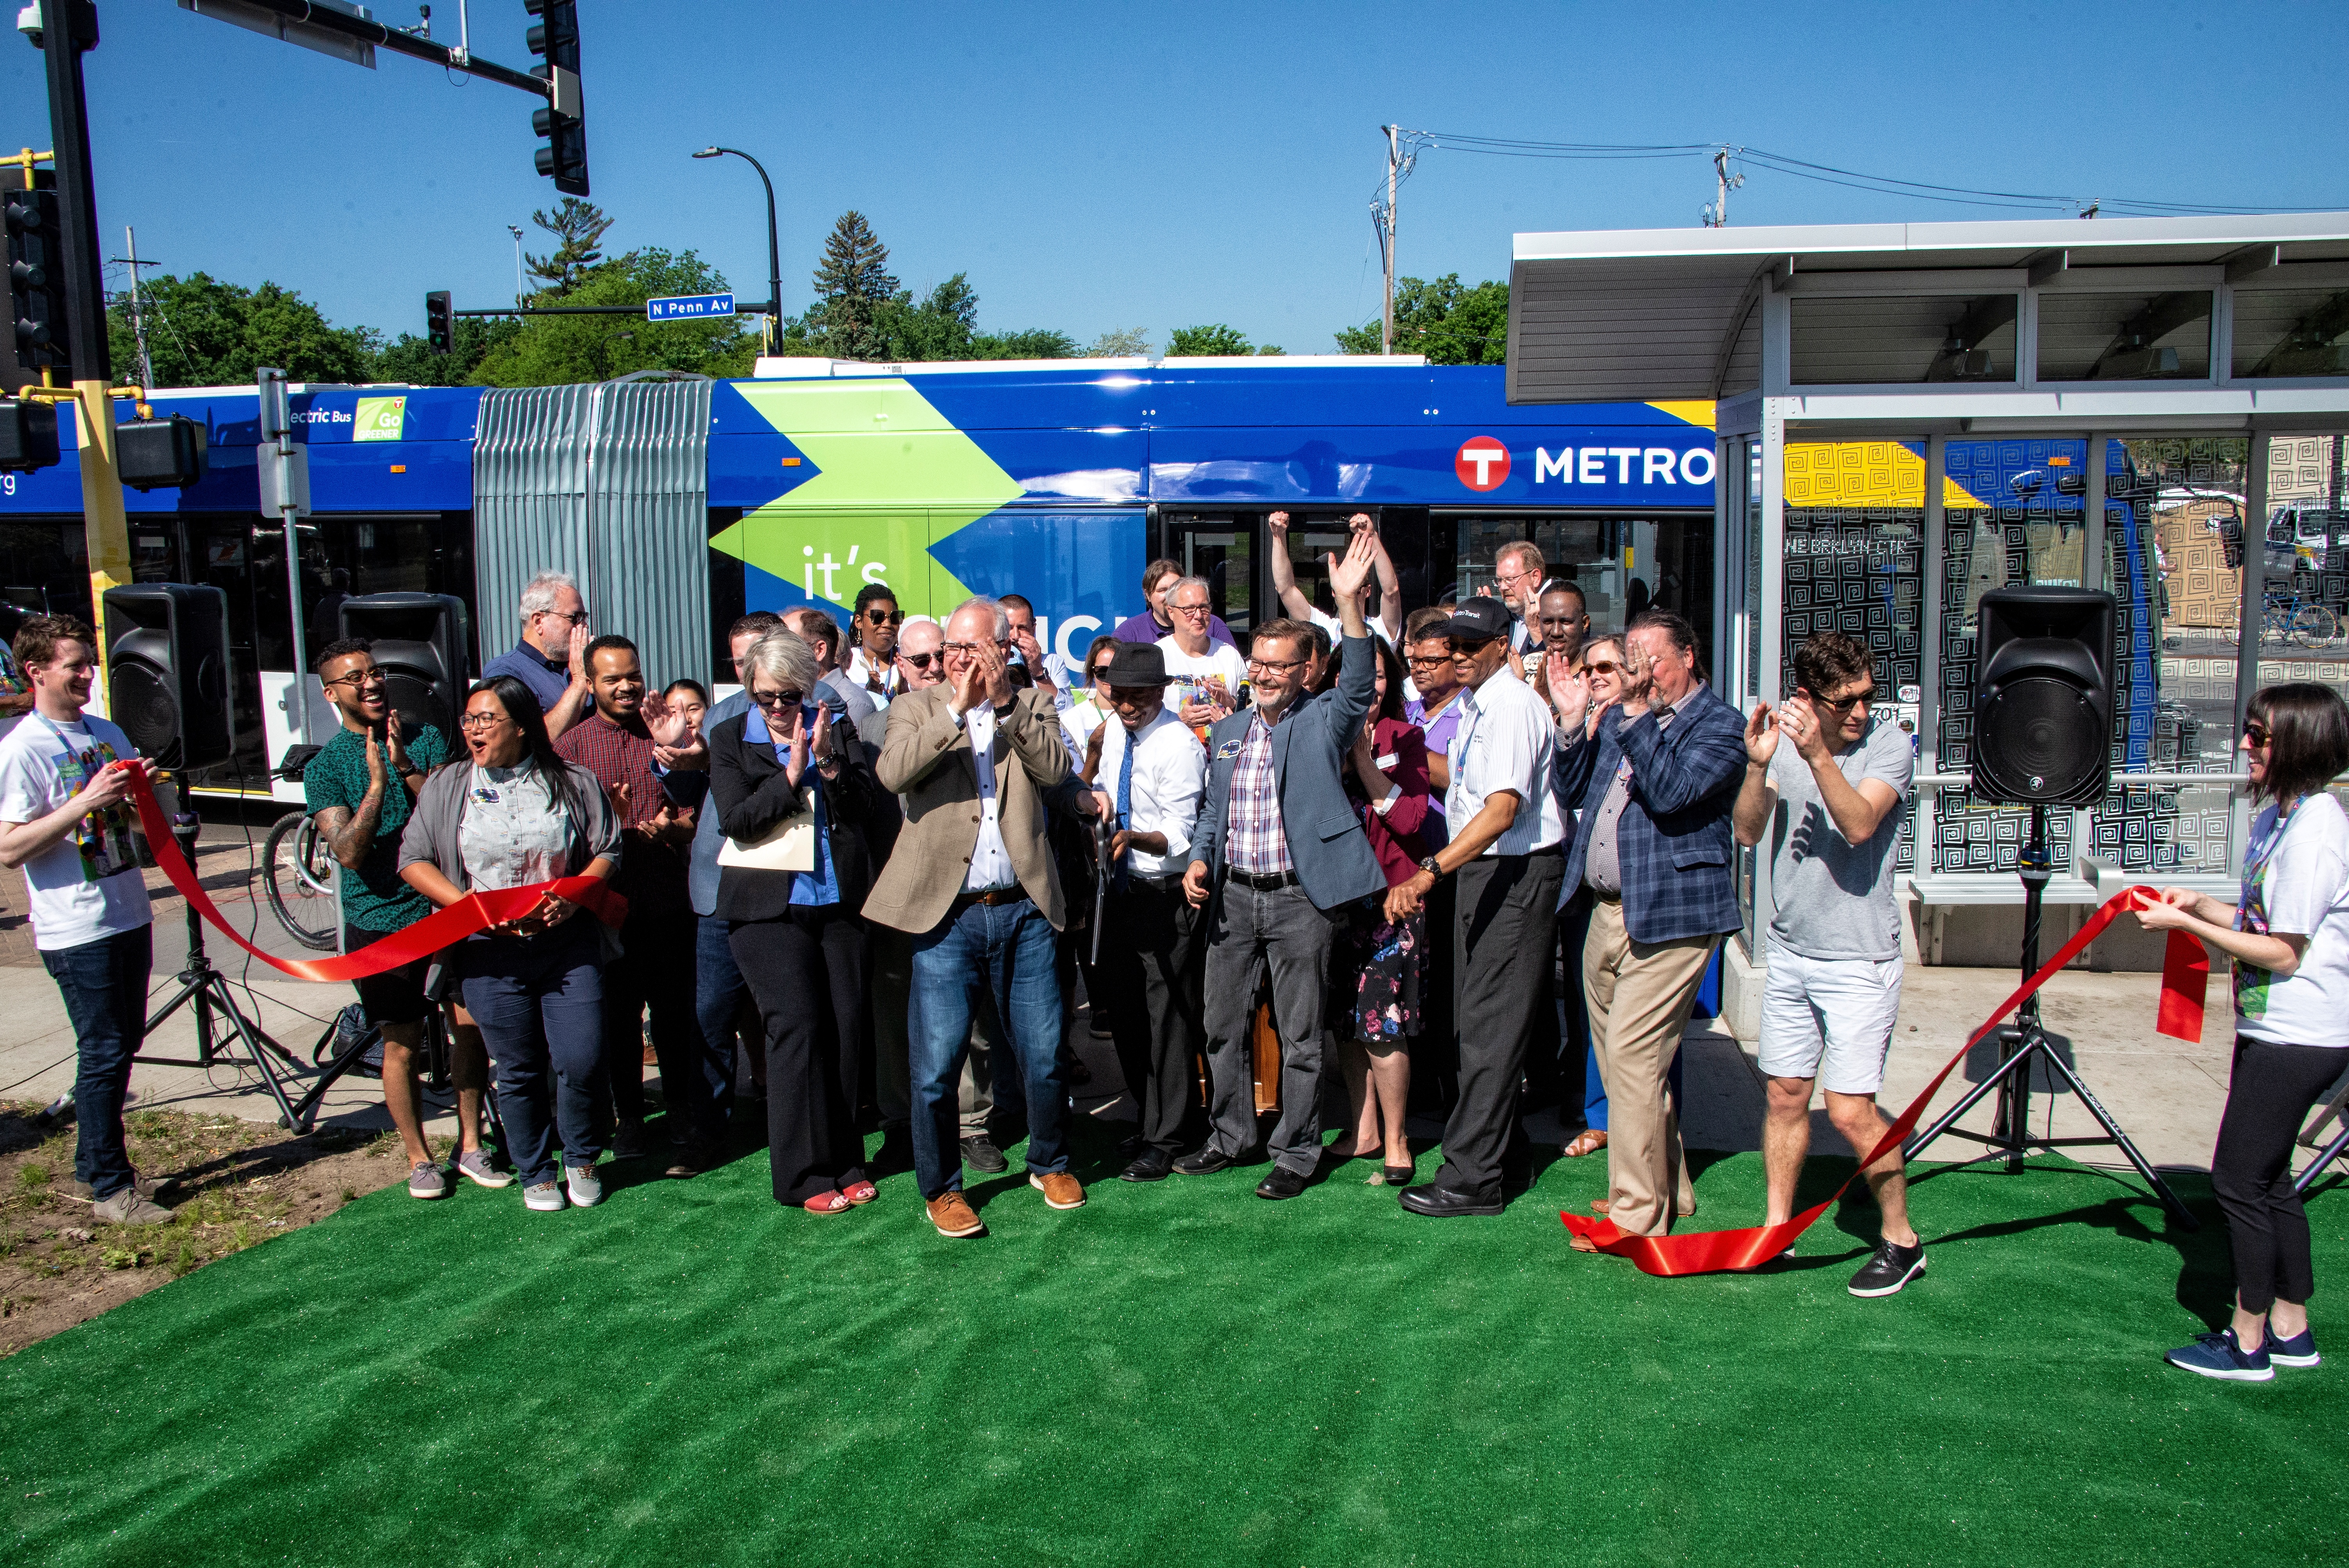 A ribbon-cutting ceremony was held in North Minneapolis to celebrate the opening of the METRO C Line on Saturday, June 8, 2019.